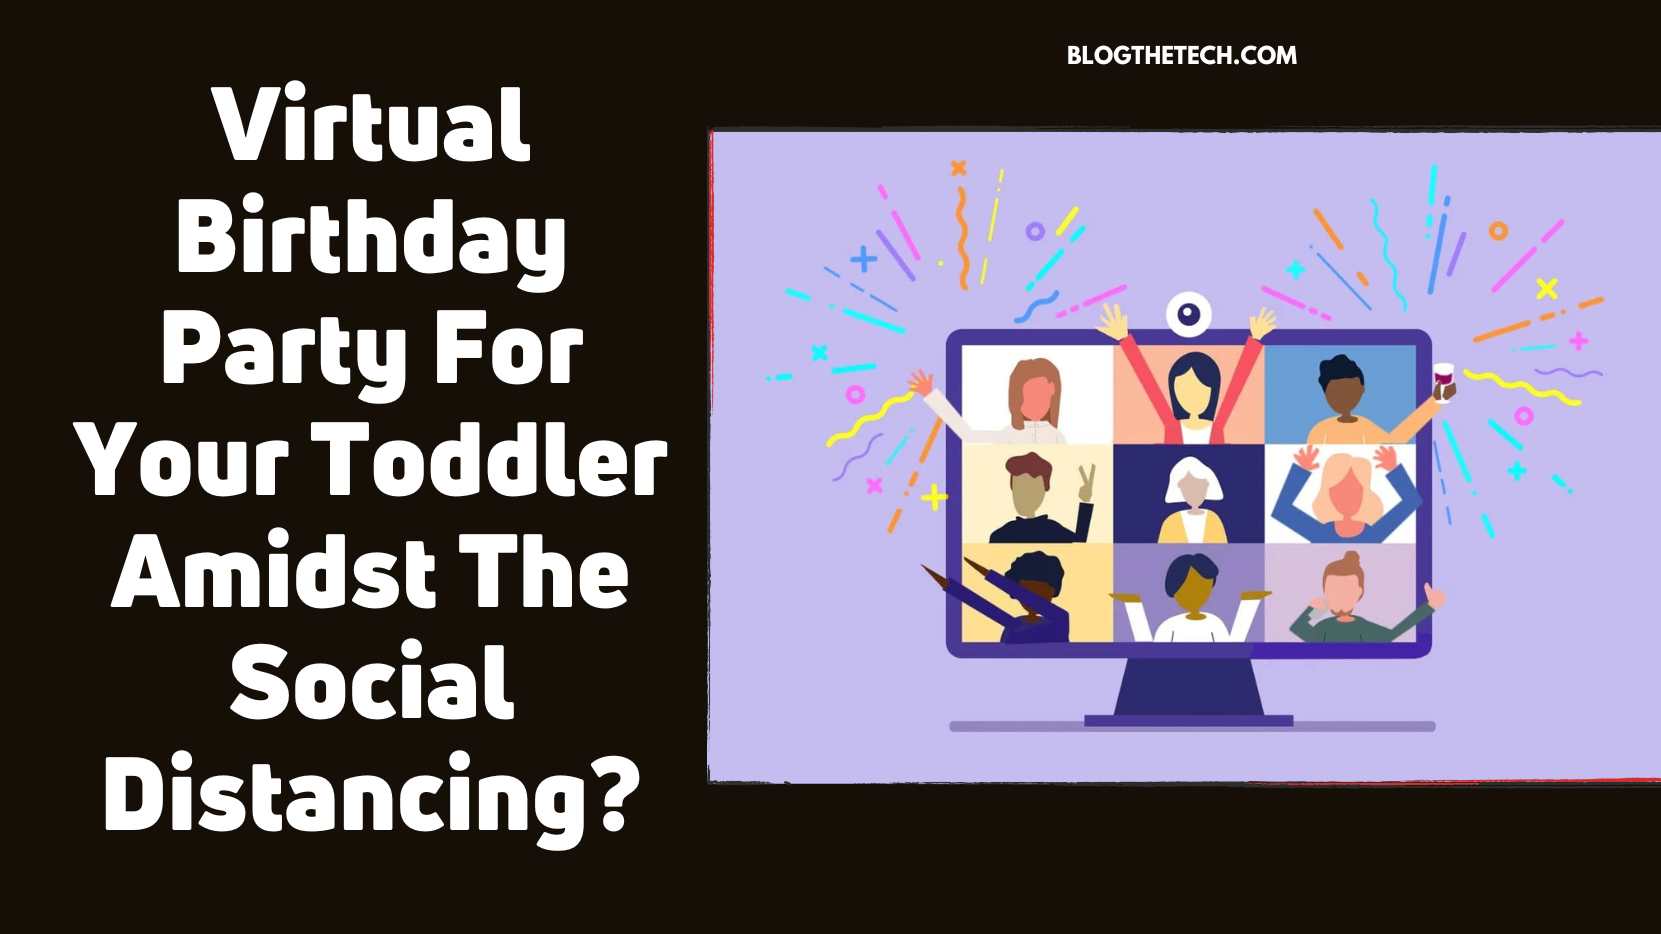 Virtual Birthday Party For Your Toddler Amidst The Social Distancing